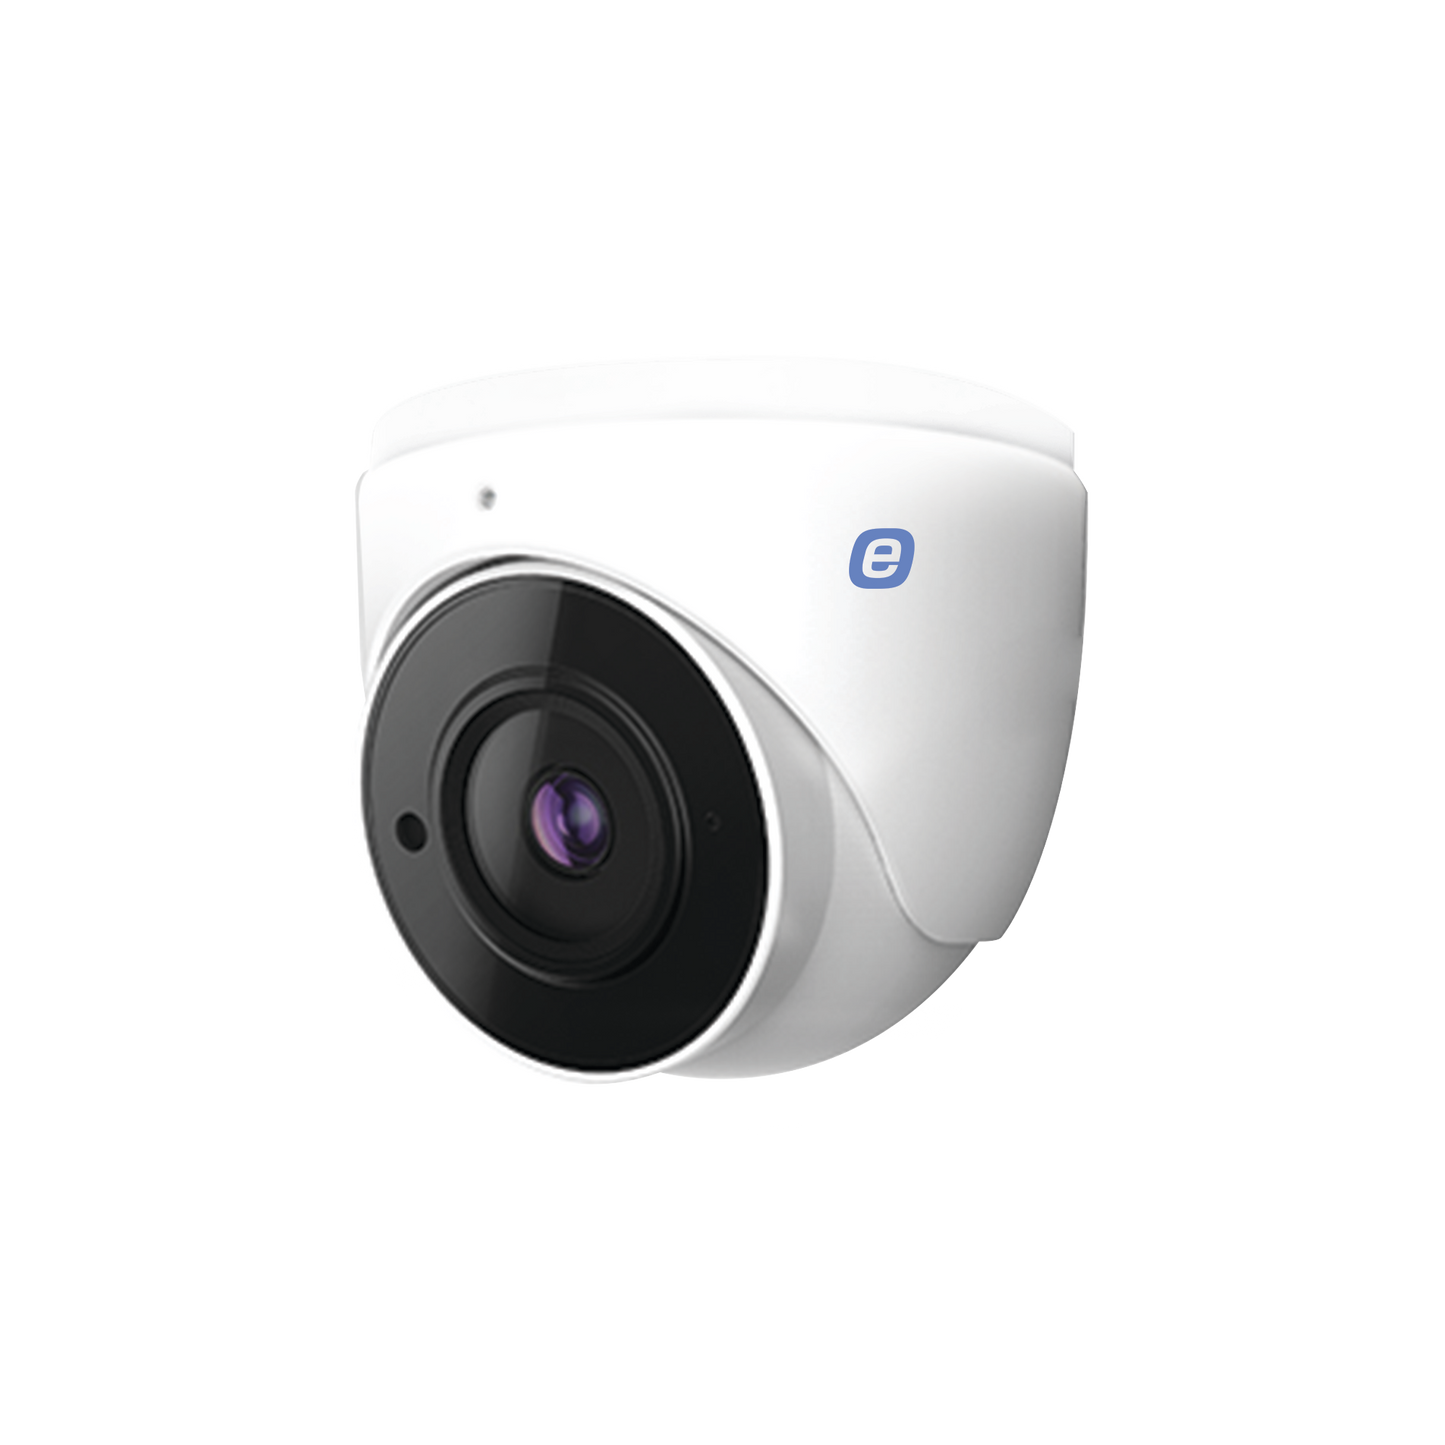 Turret IP 4 MP / POE / IR 98ft (30m) / WDR / Micro SD / IP67 / 2.8 mm Lens / Built-In Microphone / Cloud Video Recording / Metal Housing